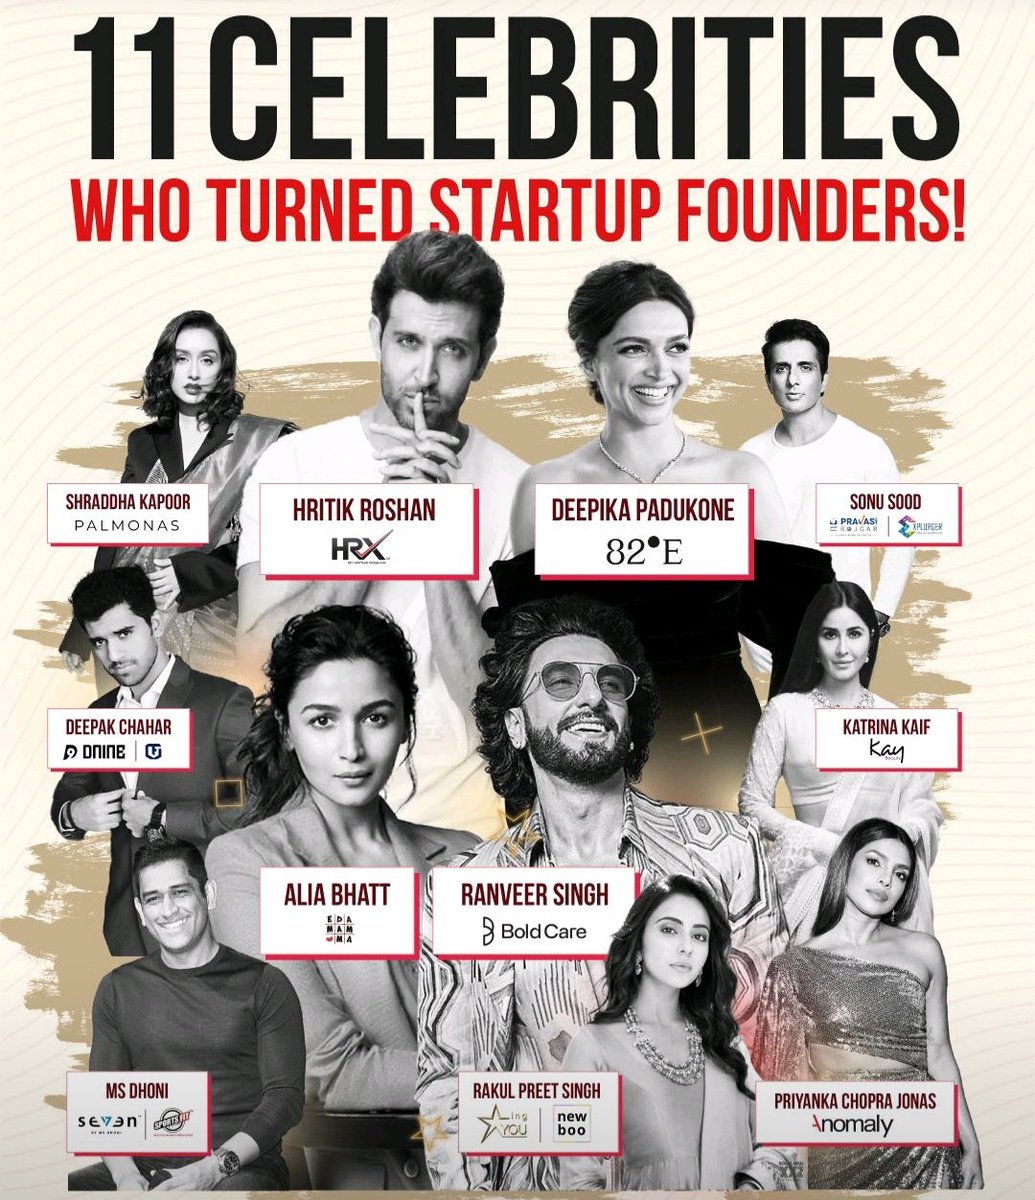 Intrigued by the entrepreneurial journeys of Bollywood stars turned startup founders? 🎥🚀 Gain some valuable insights into their success stories by checking out this post! #BollywoodEntrepreneurs #StartupsAndCelebrities #InvestorInsights #EntrepreneurialMindset #IncubatingIdeas